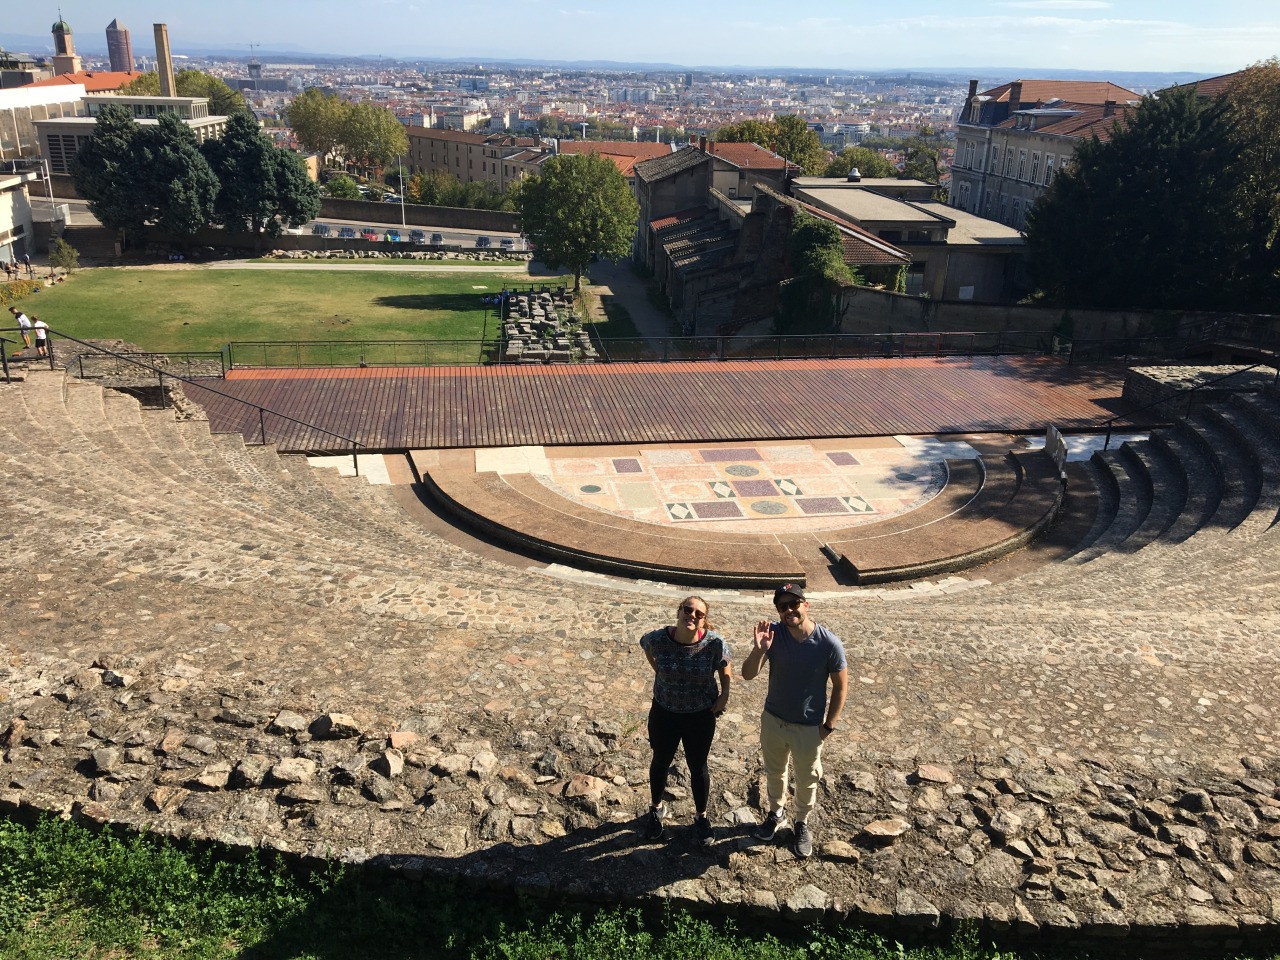 Students at a historic Site in Lyon France